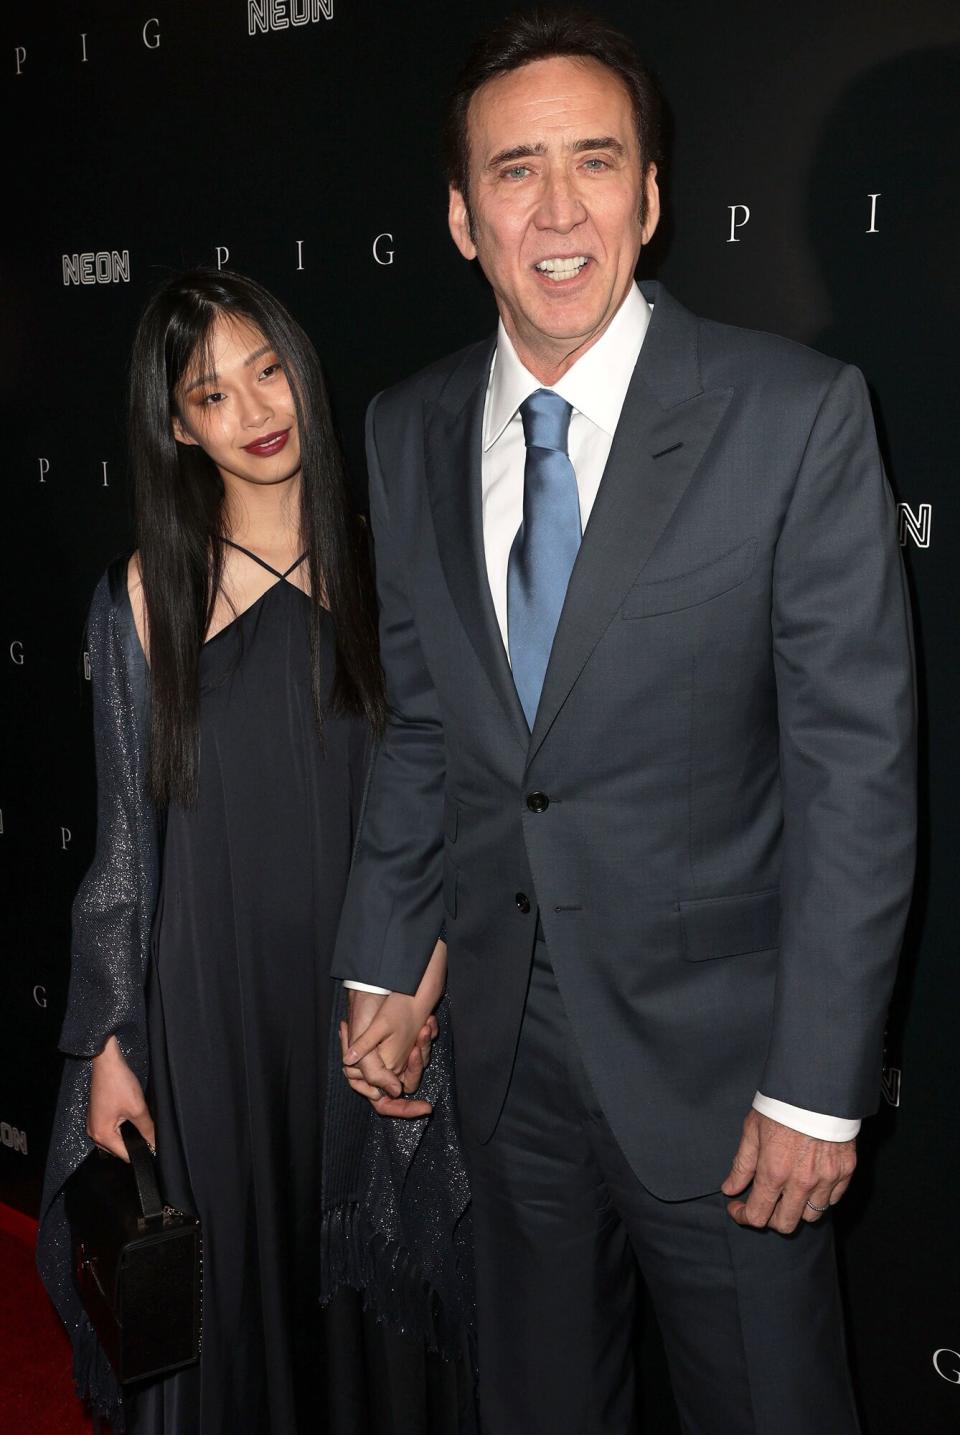 Riko Shibata and Nicolas Cage attend the Los Angeles premiere of Neon's "Pig" at Nuart Theatre on July 13, 2021 in West Los Angeles, California